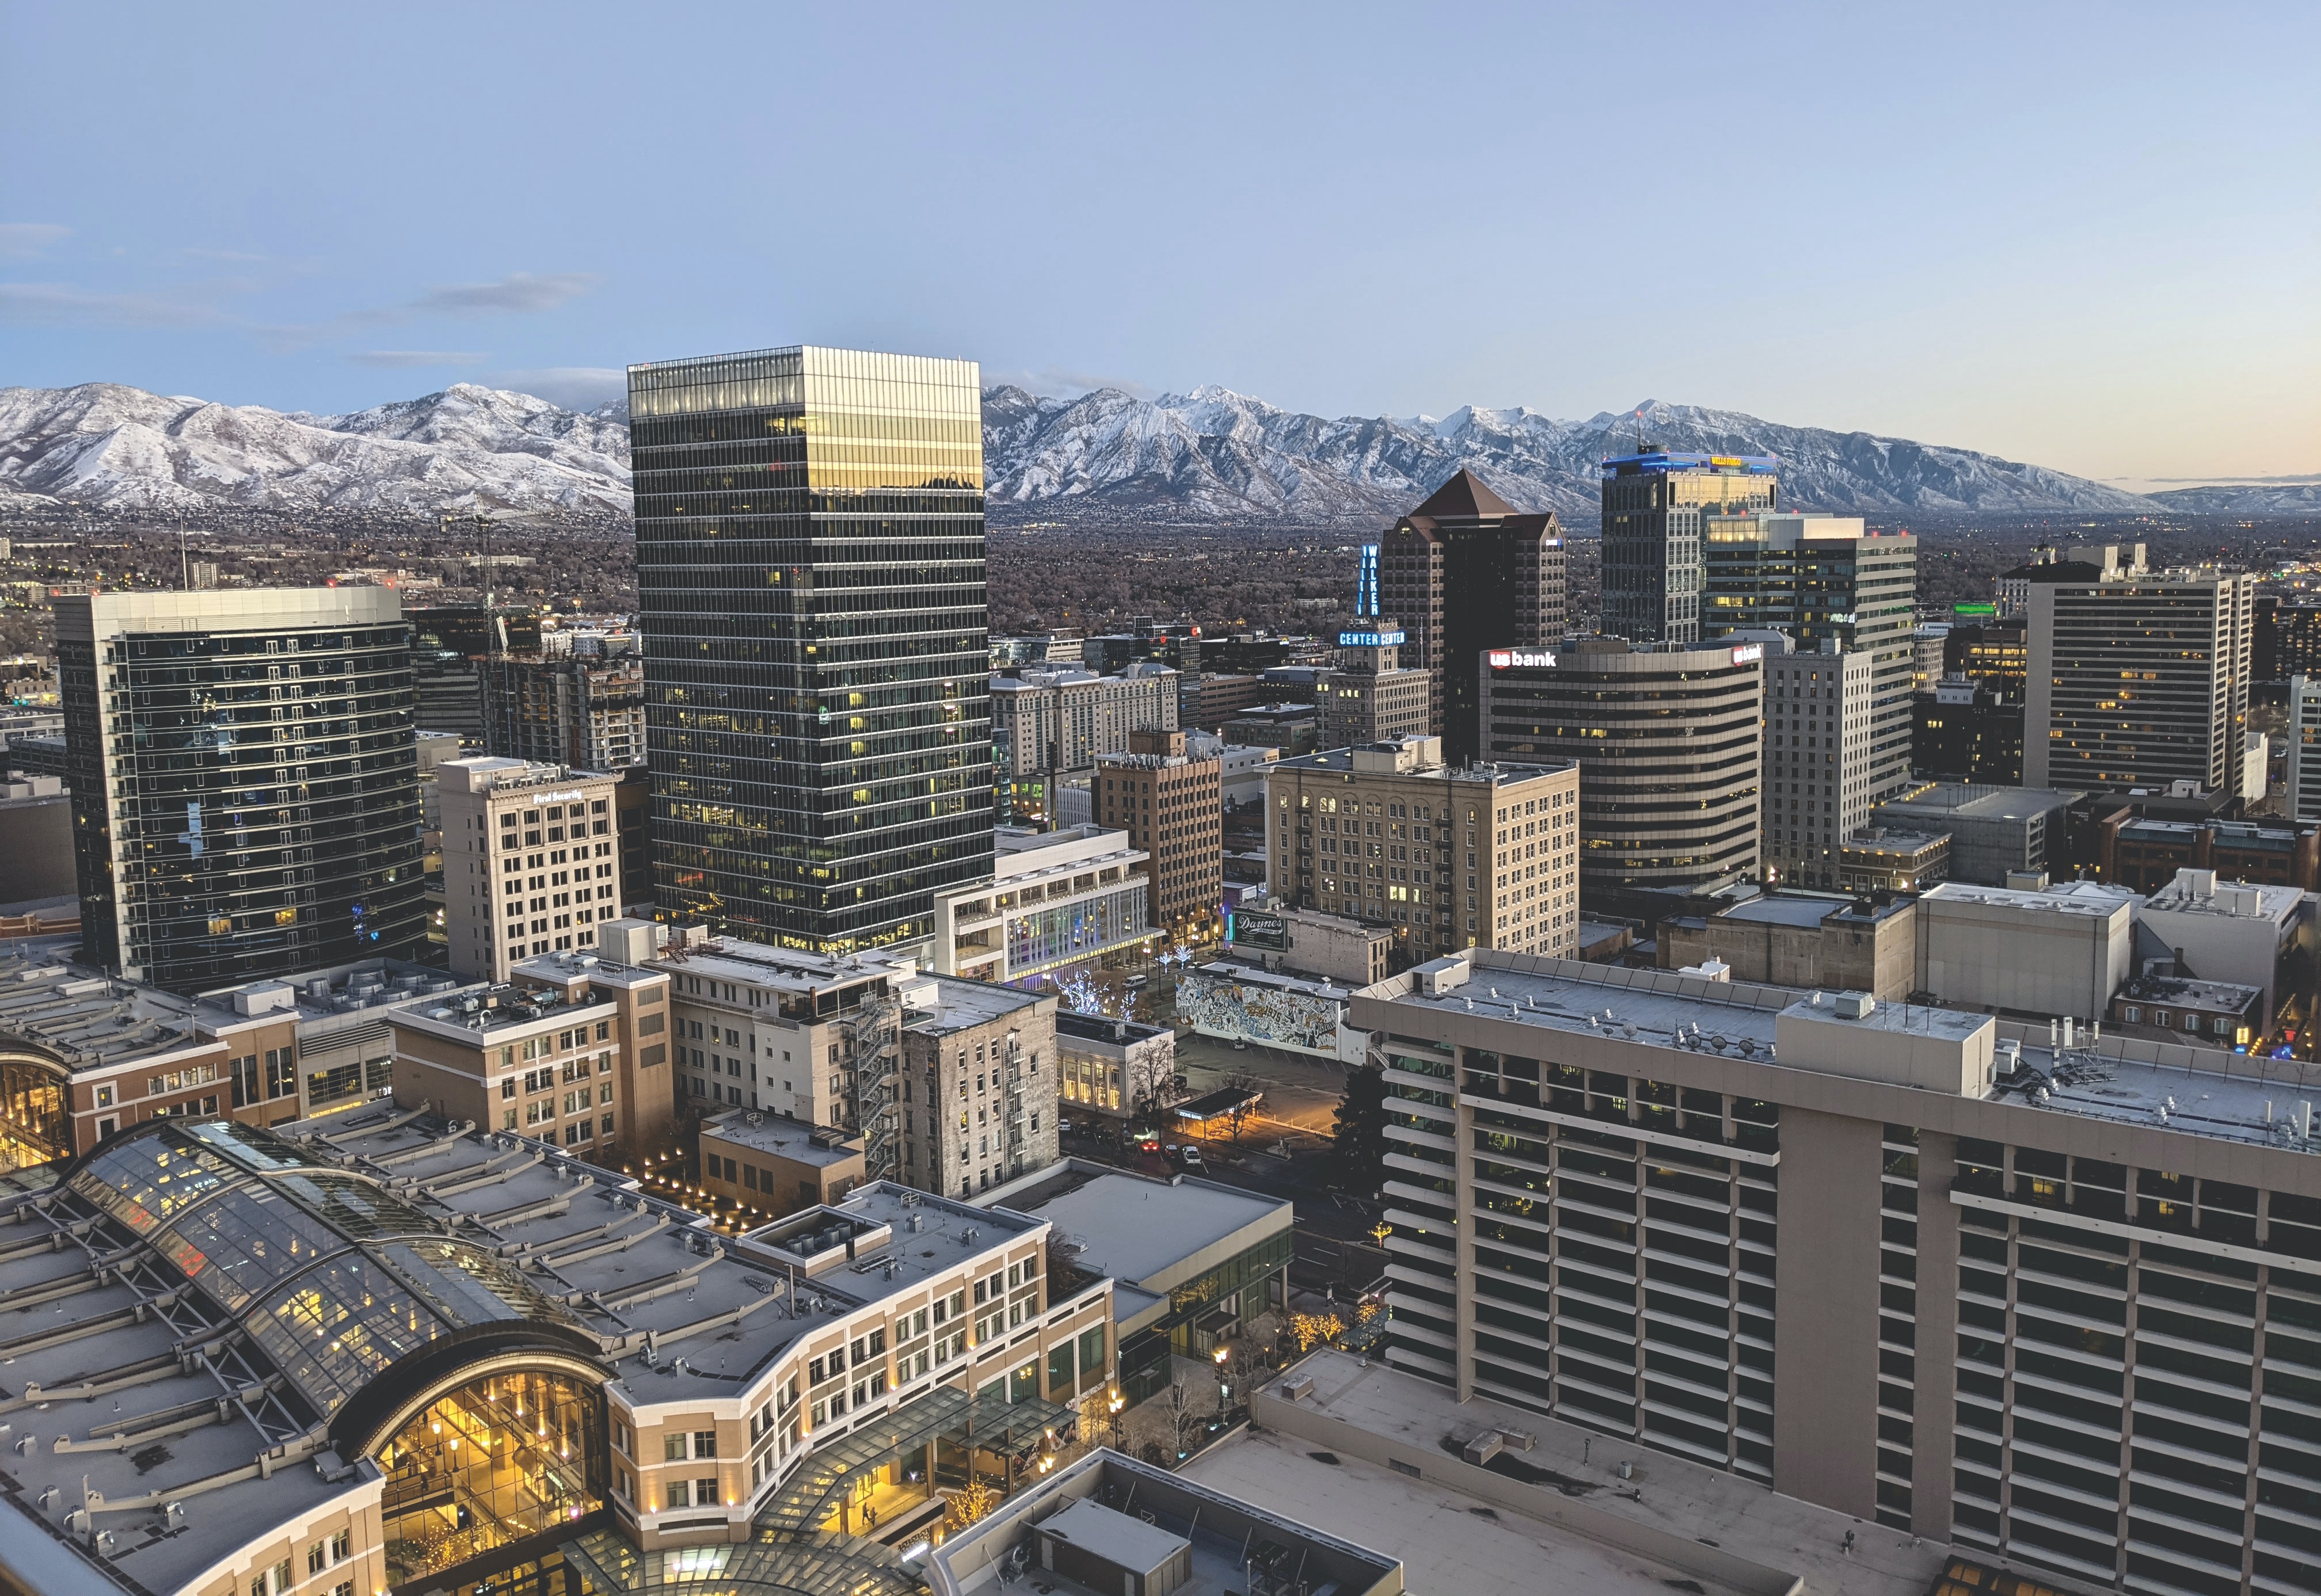 A view of the Salt Lake City skyline in the foreground, with snowcapped mountains in the background